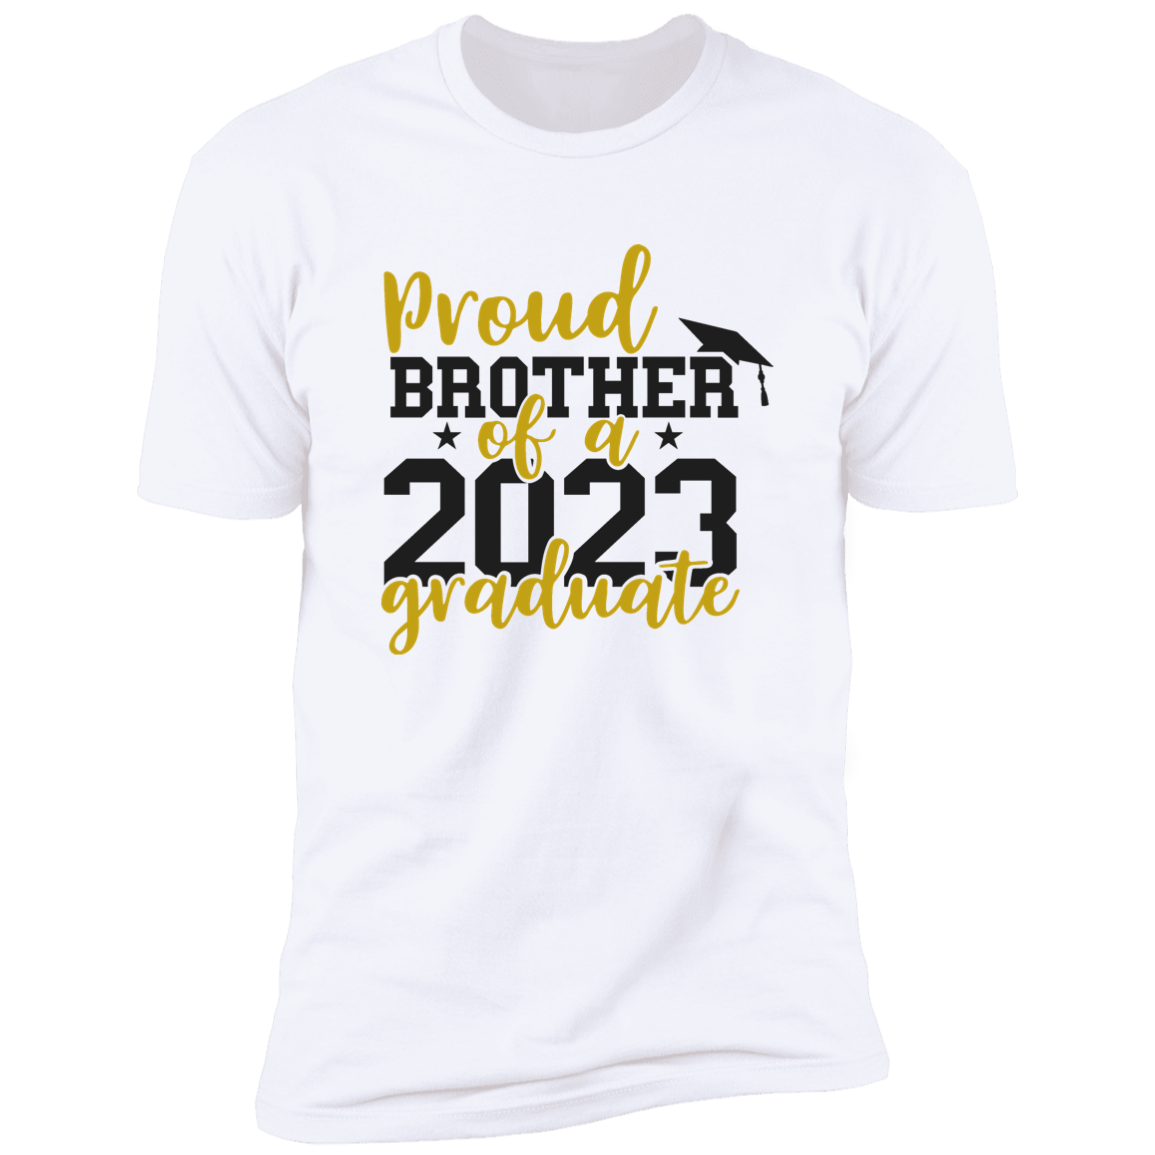 Proud Brother of a 2023 Graduate Tee